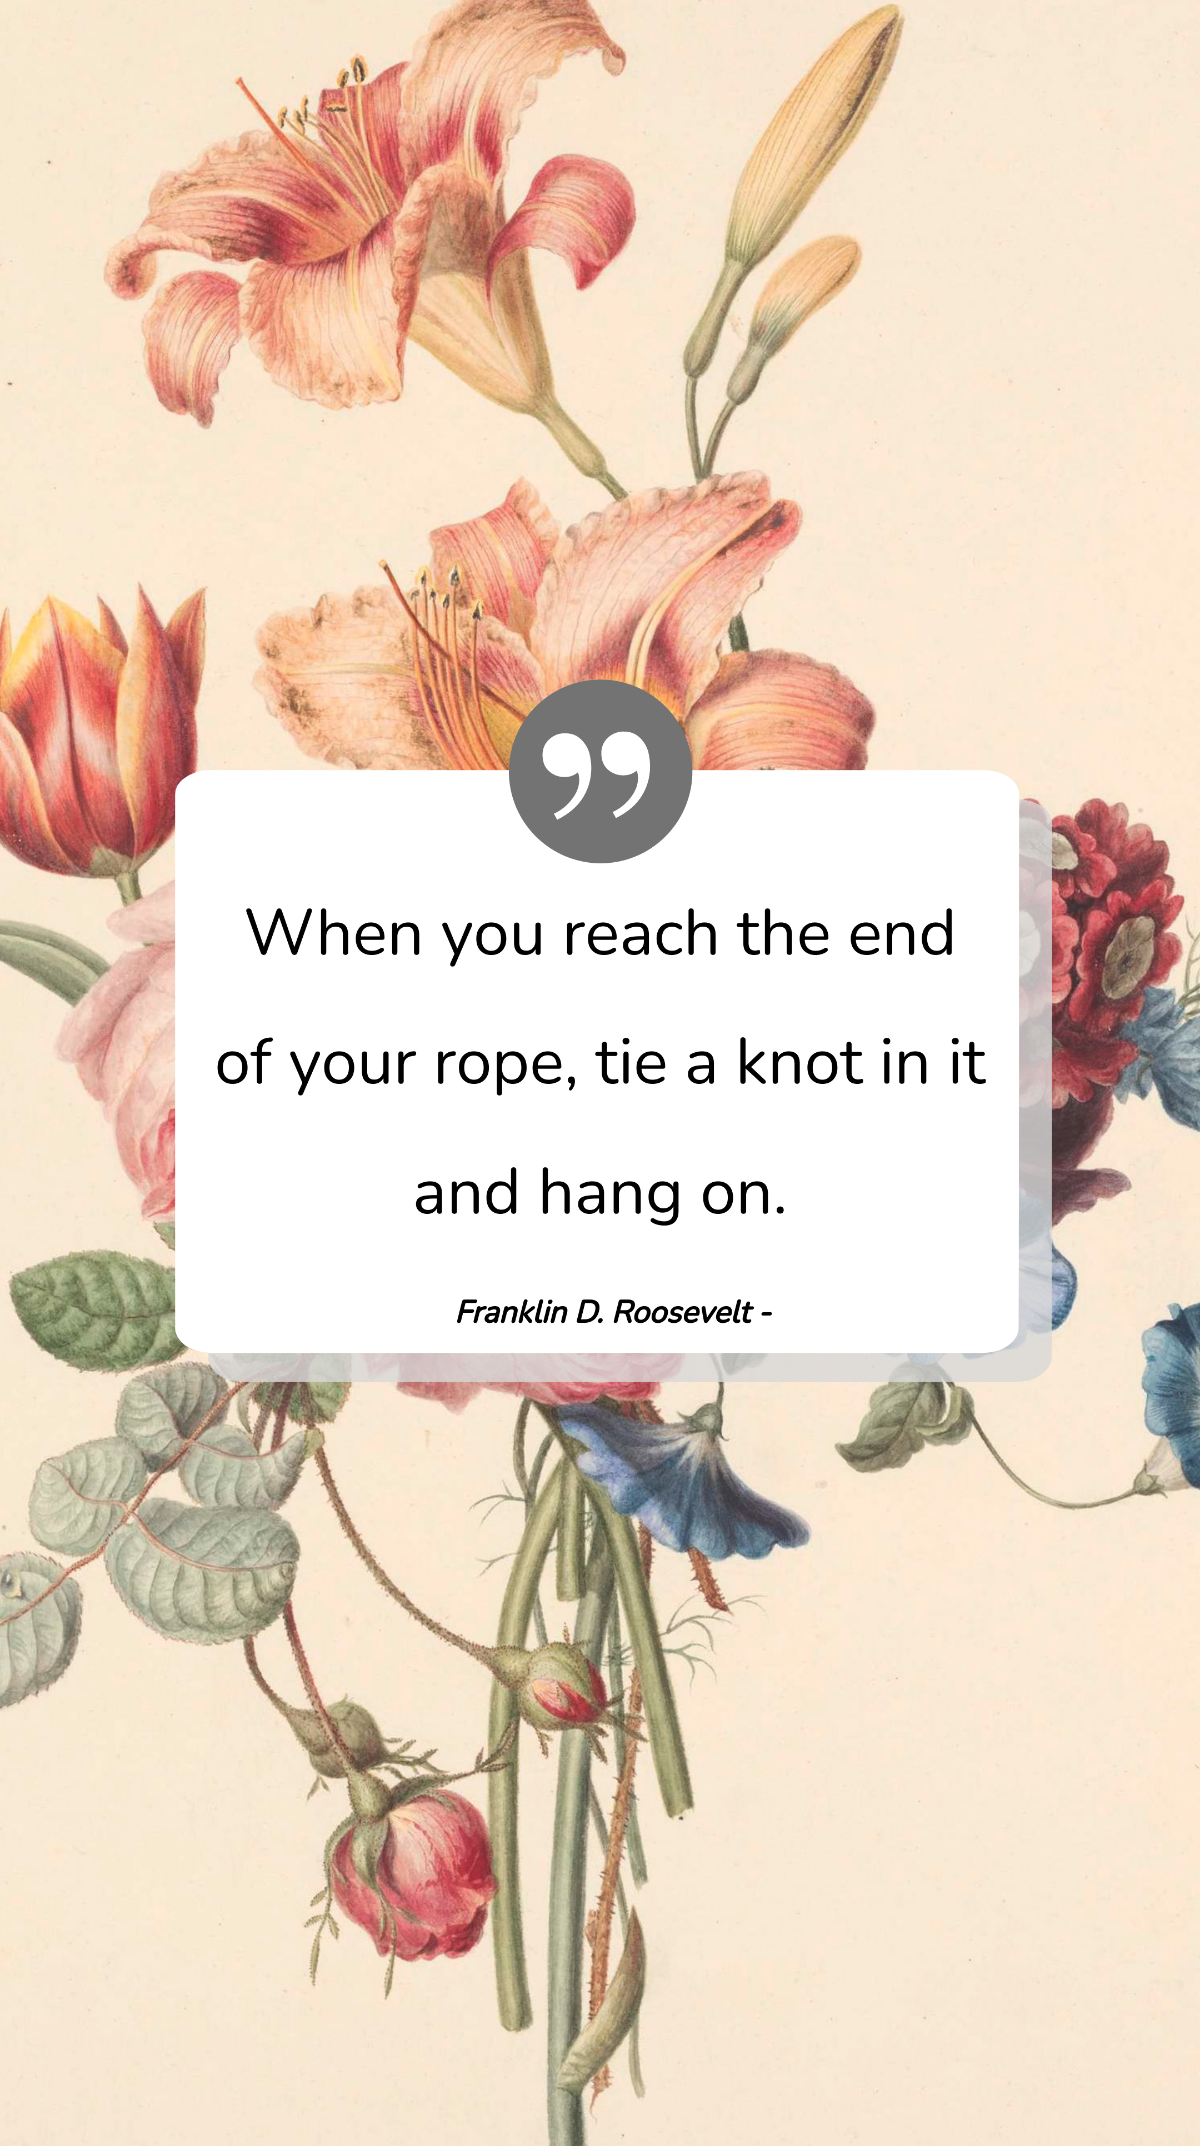 Franklin D. Roosevelt - When you reach the end of your rope, tie a knot in it and hang on. Template